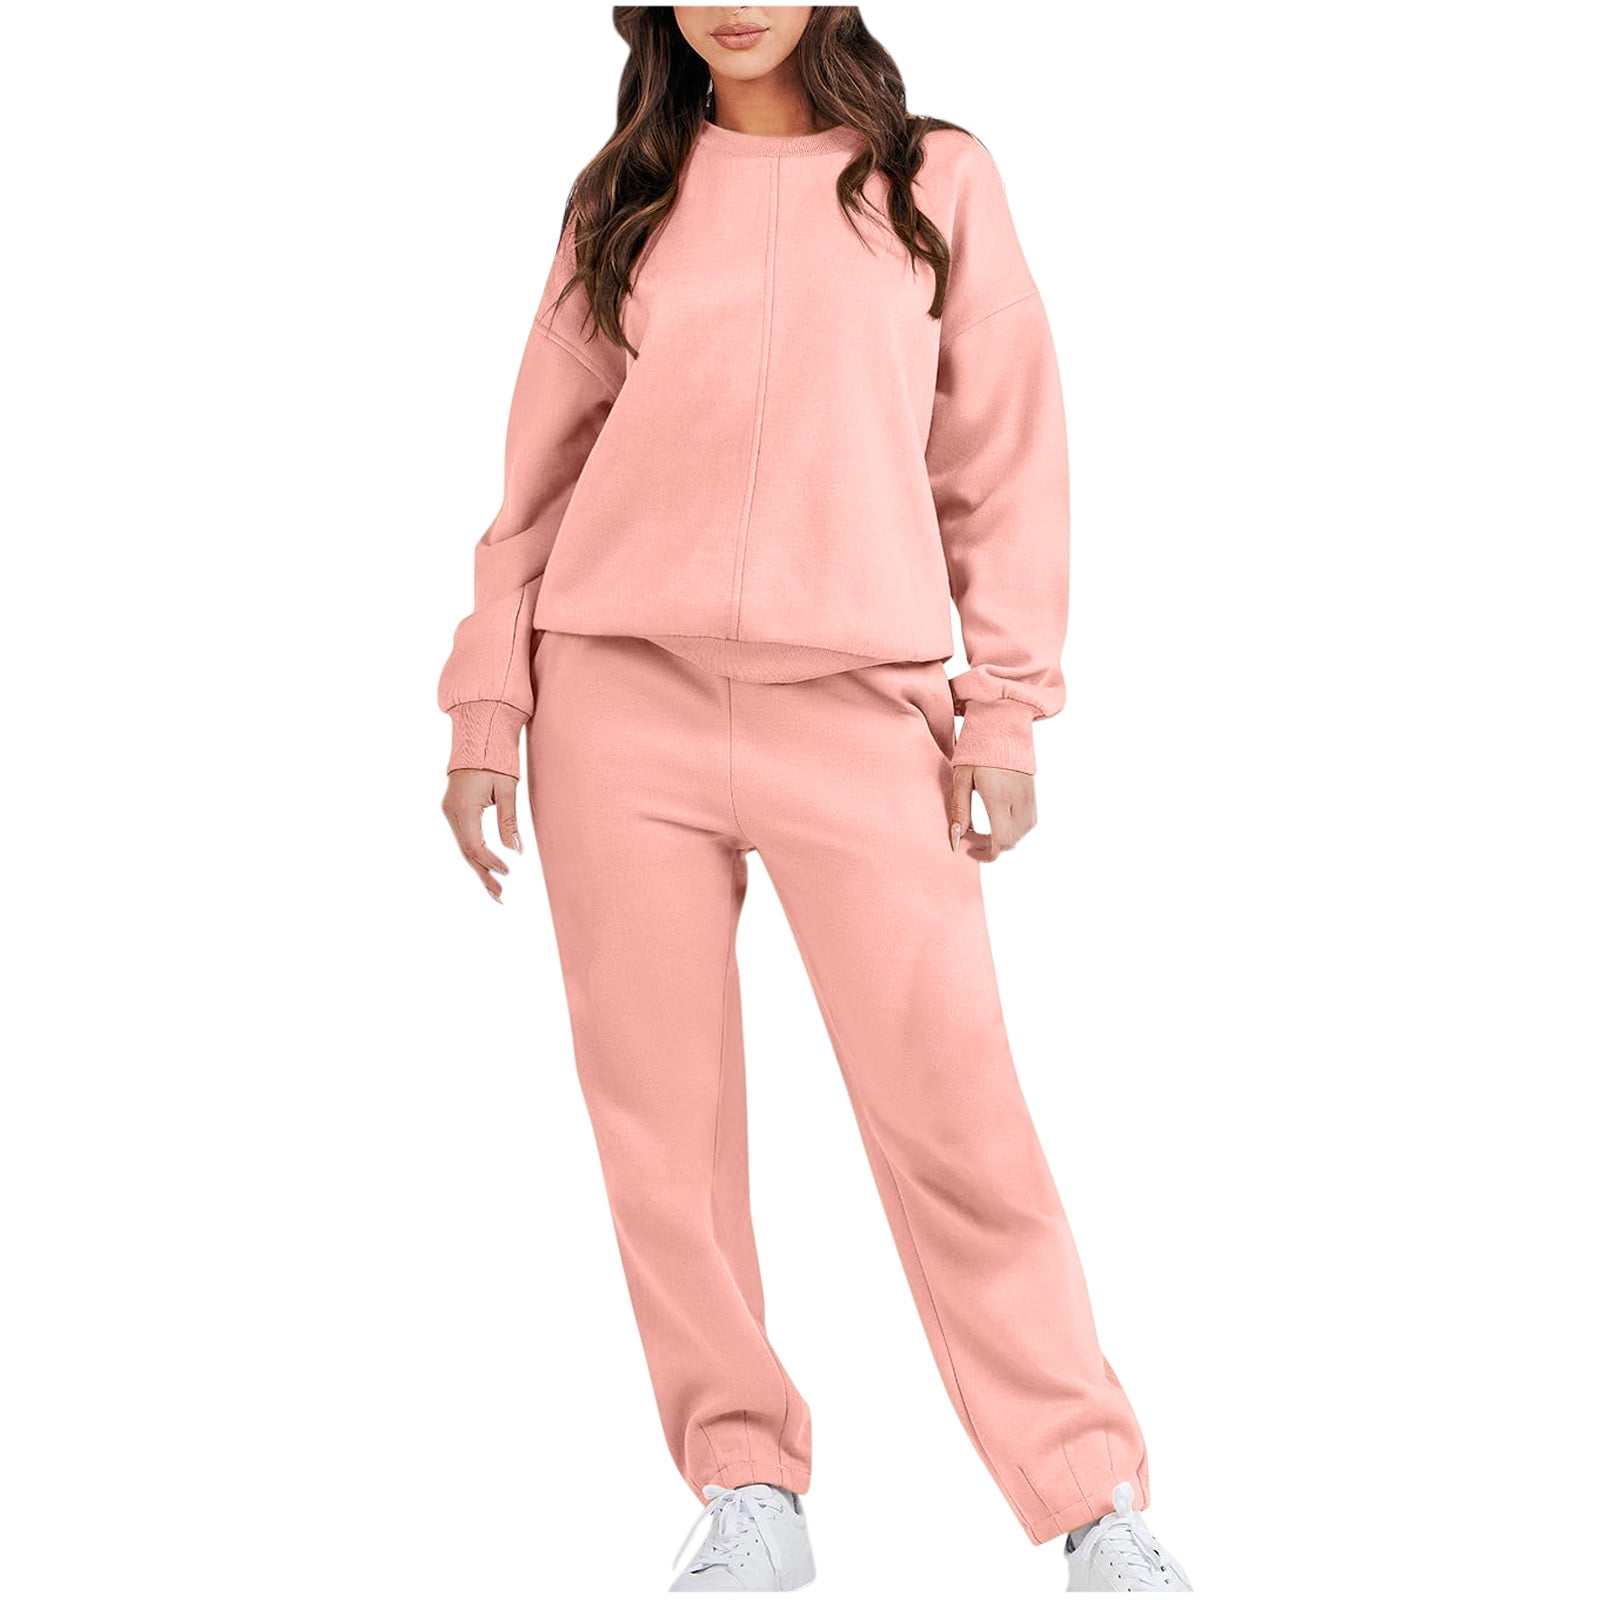 2022 Street 2 Piece Set Pink Letter Hoody Sweatshirt Top + Stacked  Sweatpants Suits Casual Sport Outfits Spring Tracksuit Suits